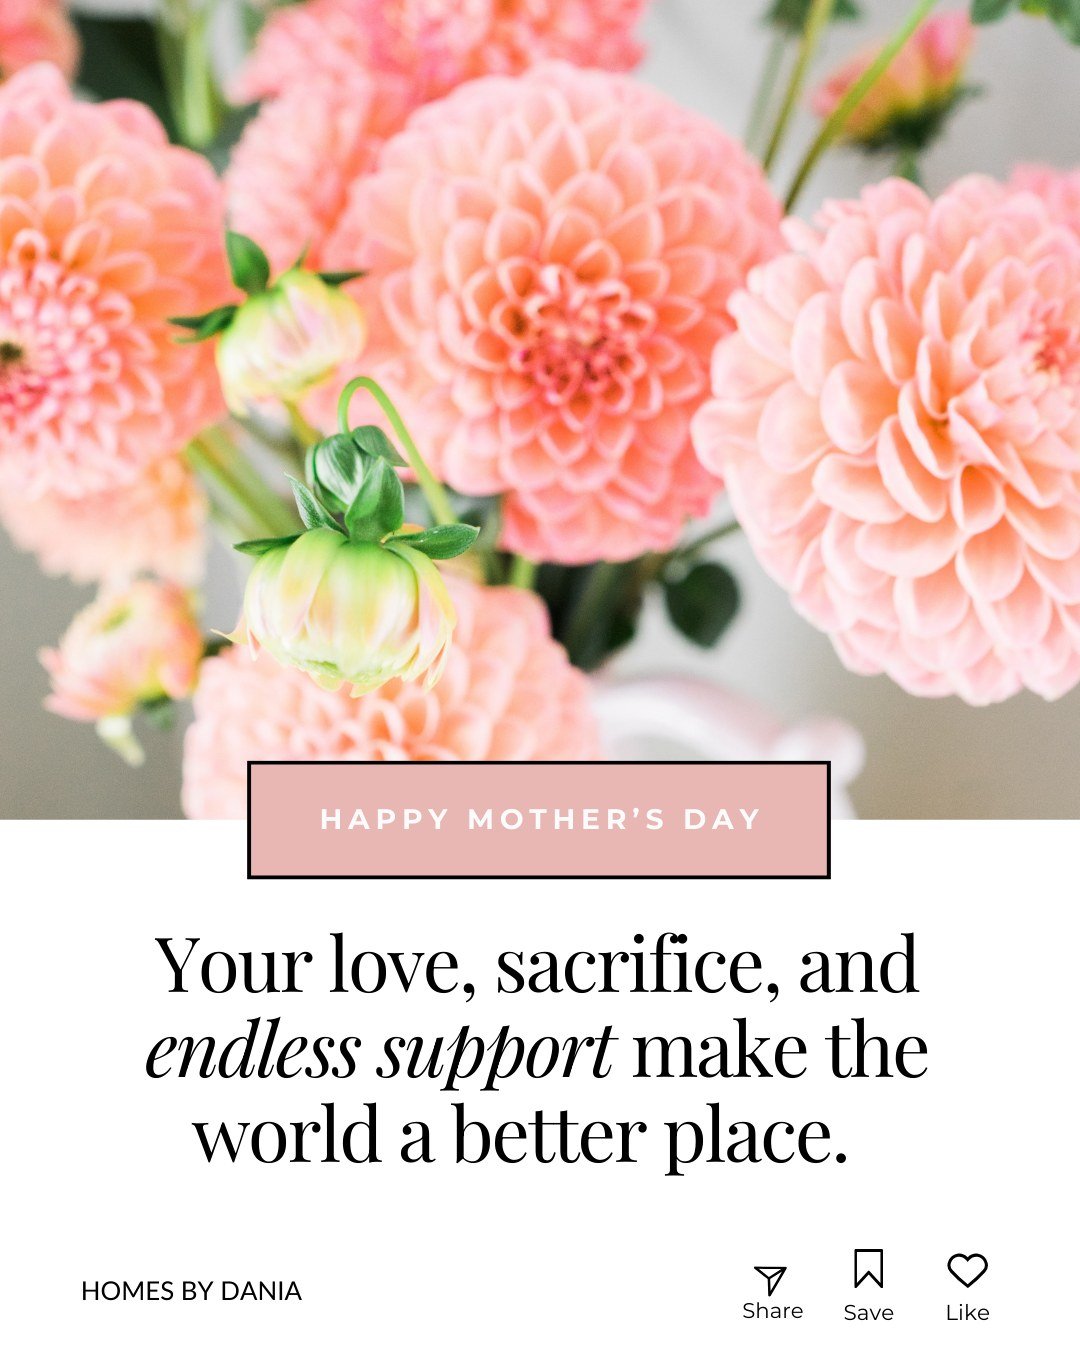 Happy Mother&rsquo;s Day to all the amazing moms out there! 💐 

Your love, sacrifice, and endless support make the world a better place. 

Today, and every day, we celebrate you 💖 

Thank you for all that you do! 

#happymothersday #mothersday  #mo